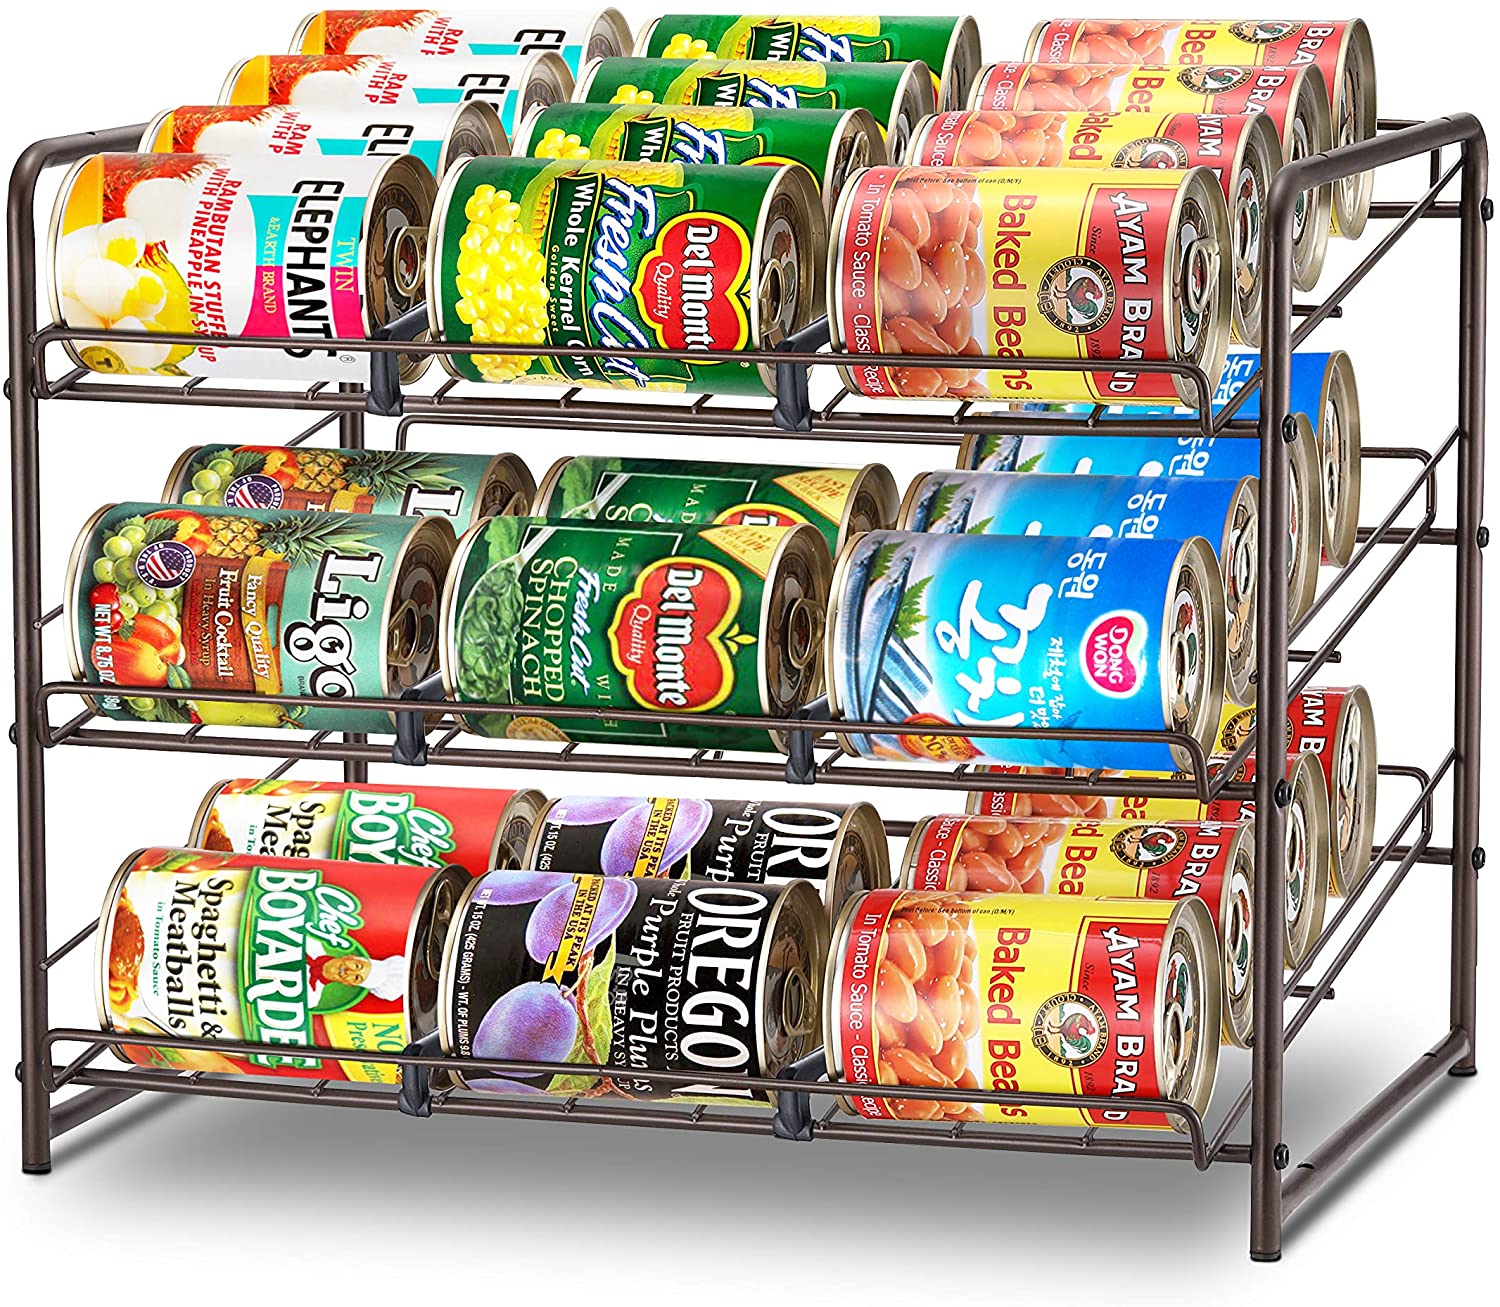 https://bigbigmart.com/wp-content/uploads/2022/01/Simple-Trending-Can-Rack-Organizer-Stackable-Can-Storage-Dispenser-Holds-up-to-36-Cans-for-Kitchen-Cabinet-or-Pantry-Bronze.jpg